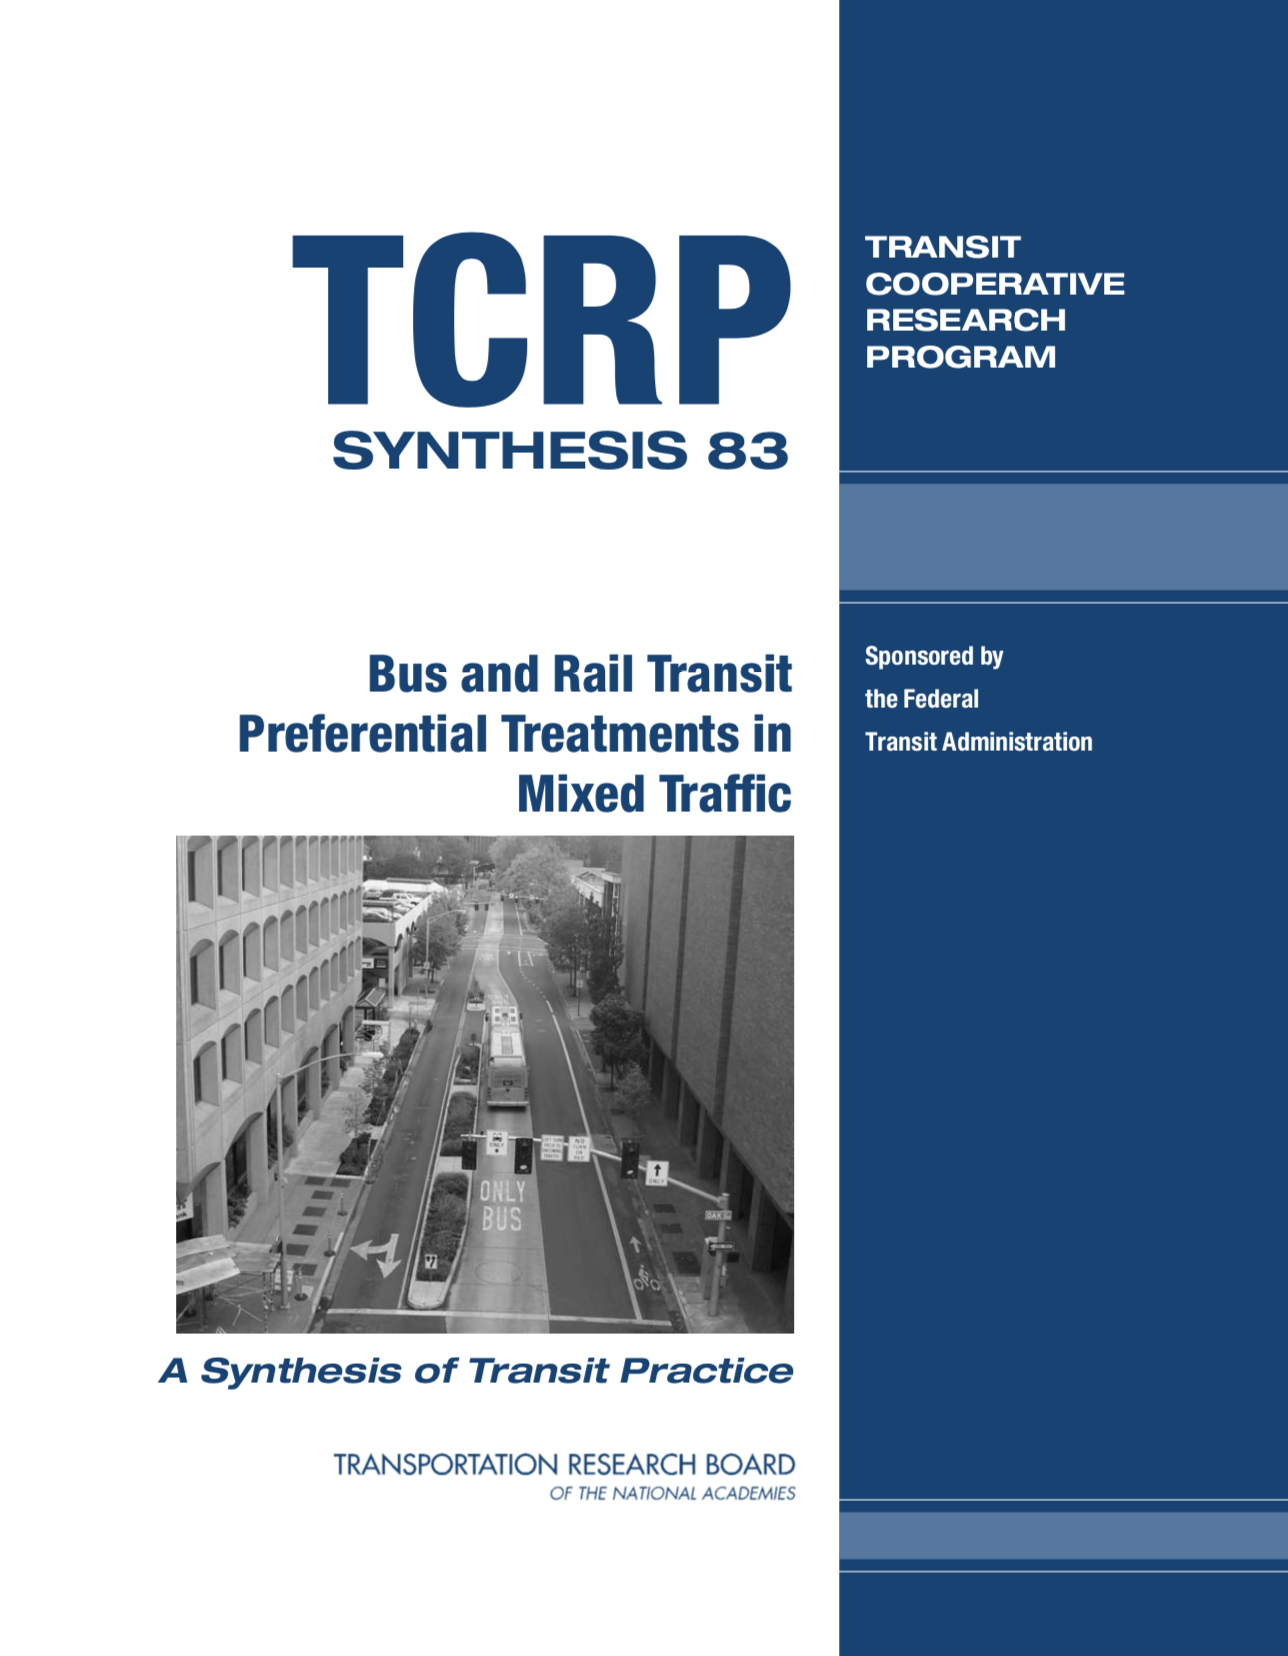 TCRP Synthesis 83: Bus and Rail Transit: Preferential Treatments in Mixed Traffic [PUB]